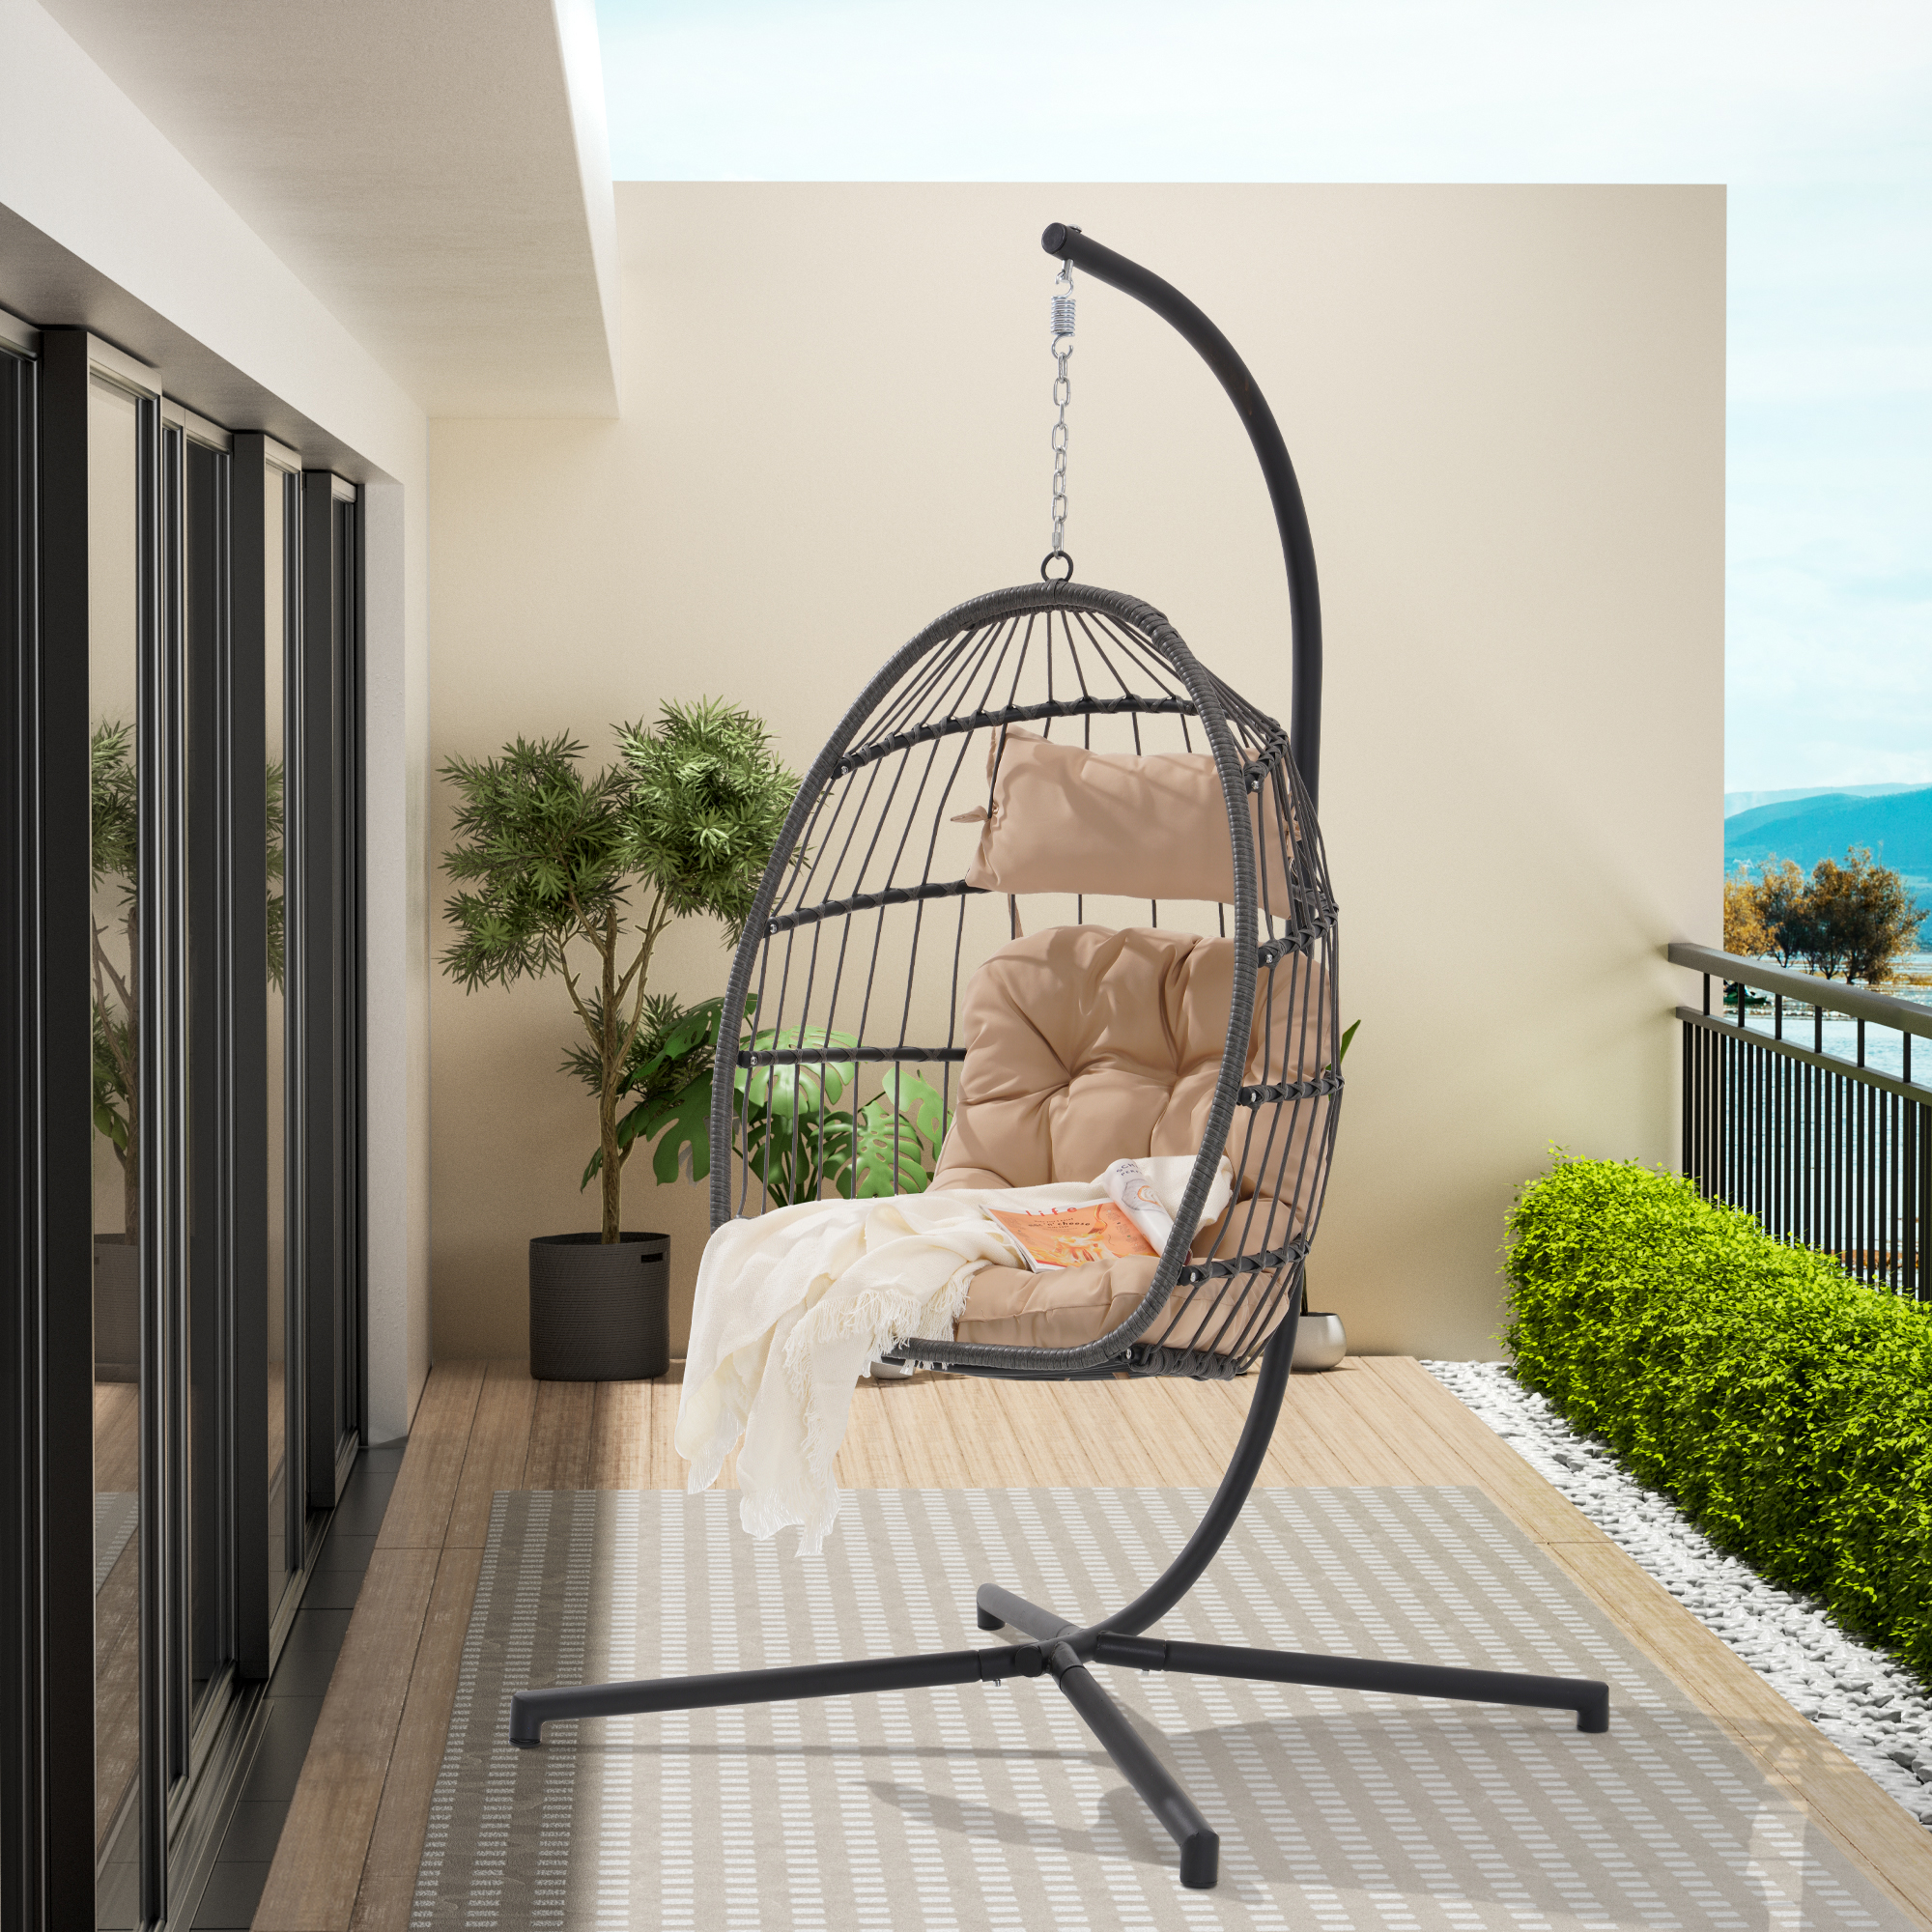 Wicker Swing Chair, BTMWAY Patio Foldable Egg Chair with Stand and Cushions, Outdoor All-weather Rattan Hammock Egg Chair Folding Hanging Chair for Balcony Backyard Garden Poolside, Holds 380lb, Beige - image 1 of 4